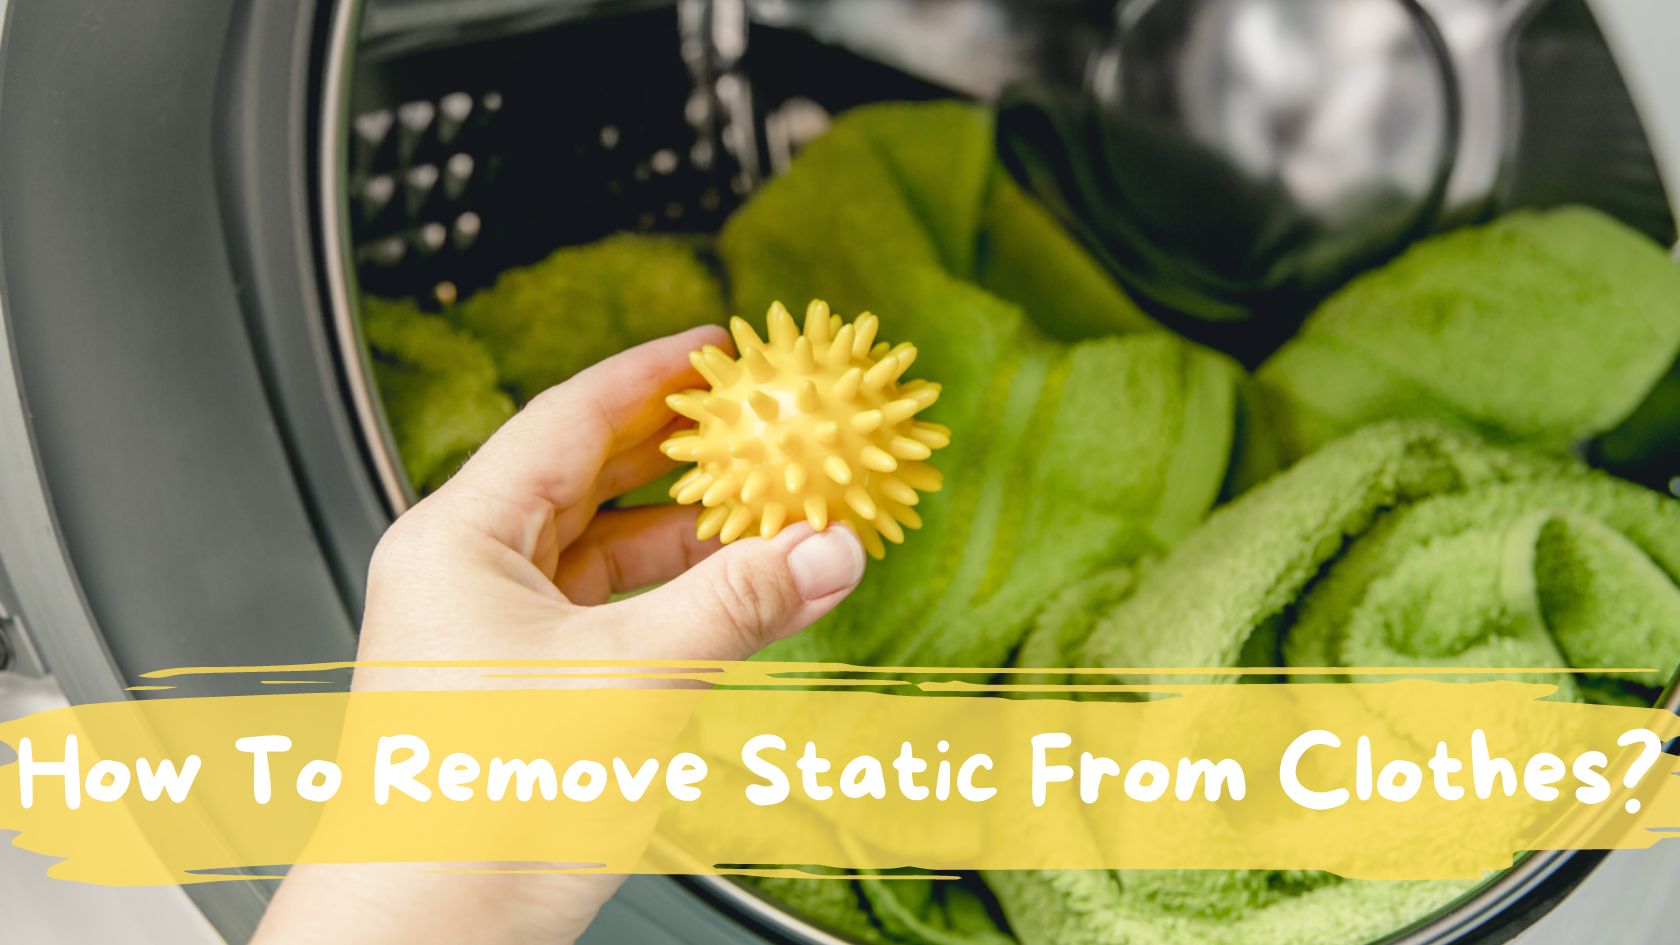 How To Remove Static From Clothes